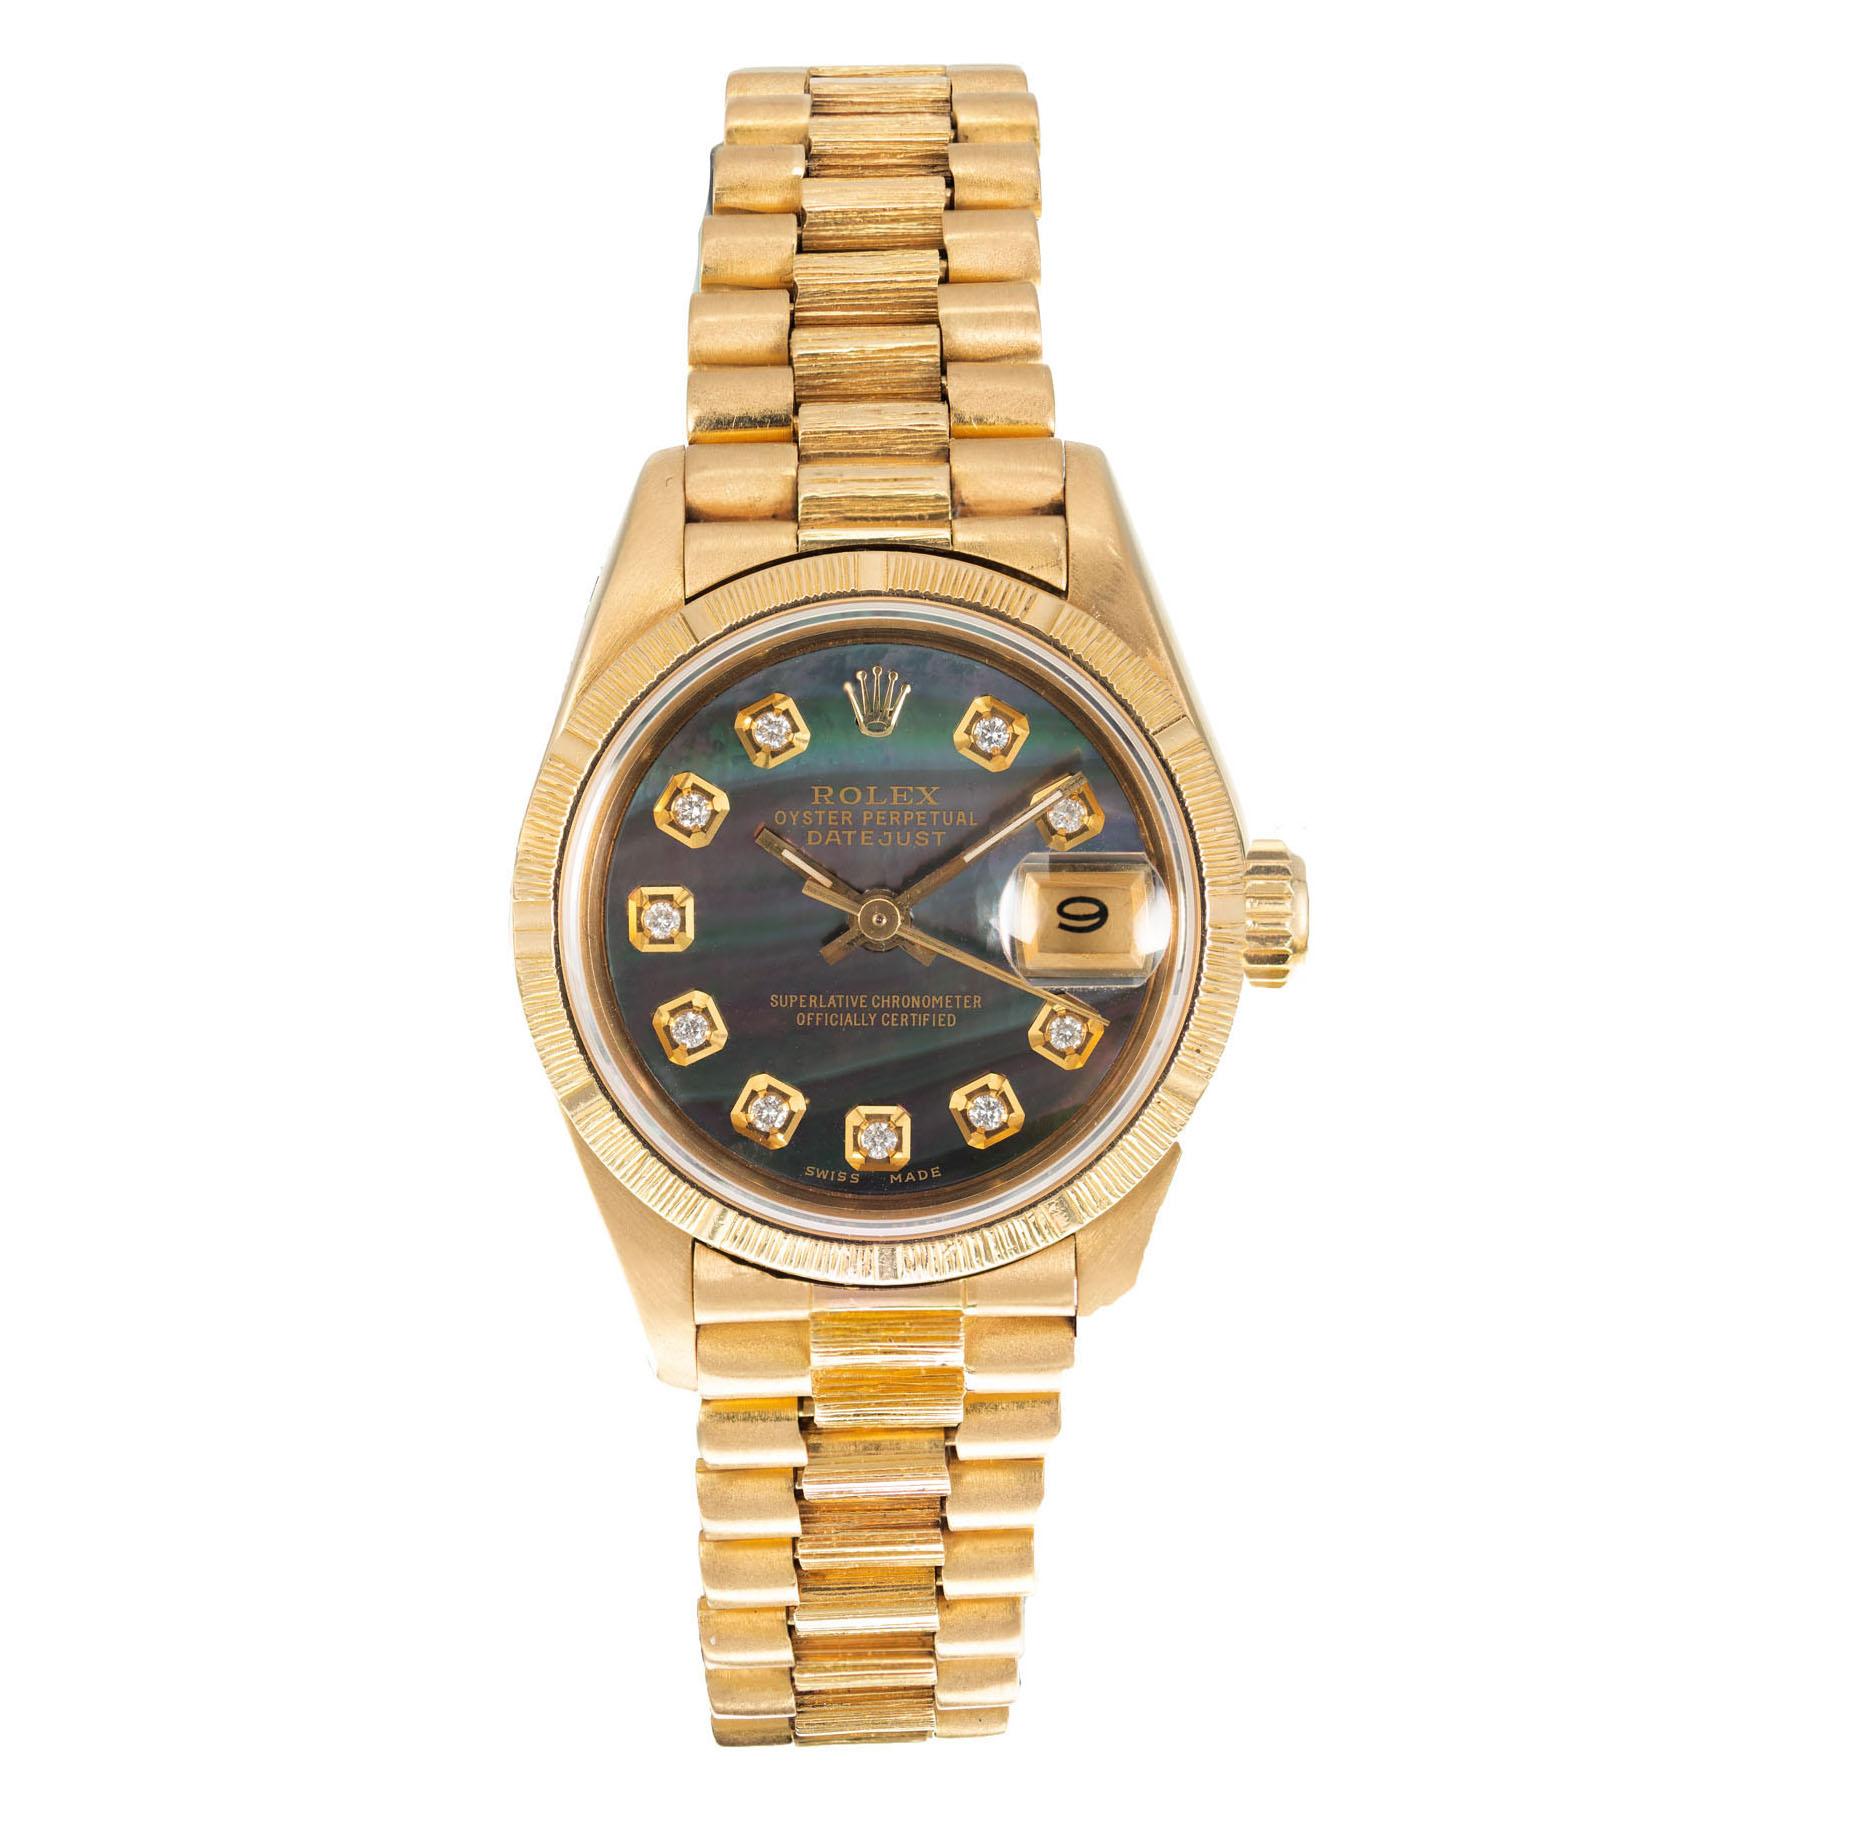 Ladies Rolex bark finish President wristwatch in solid 18k gold with a custom black mother of pearl diamond dial. 7 Inches. Circa 1985

Length: 33.05mm
Width: 26mm
Band width at case: 13.50mm
Case thickness: 10.46mm
Band: 18k yellow gold
Crystal: